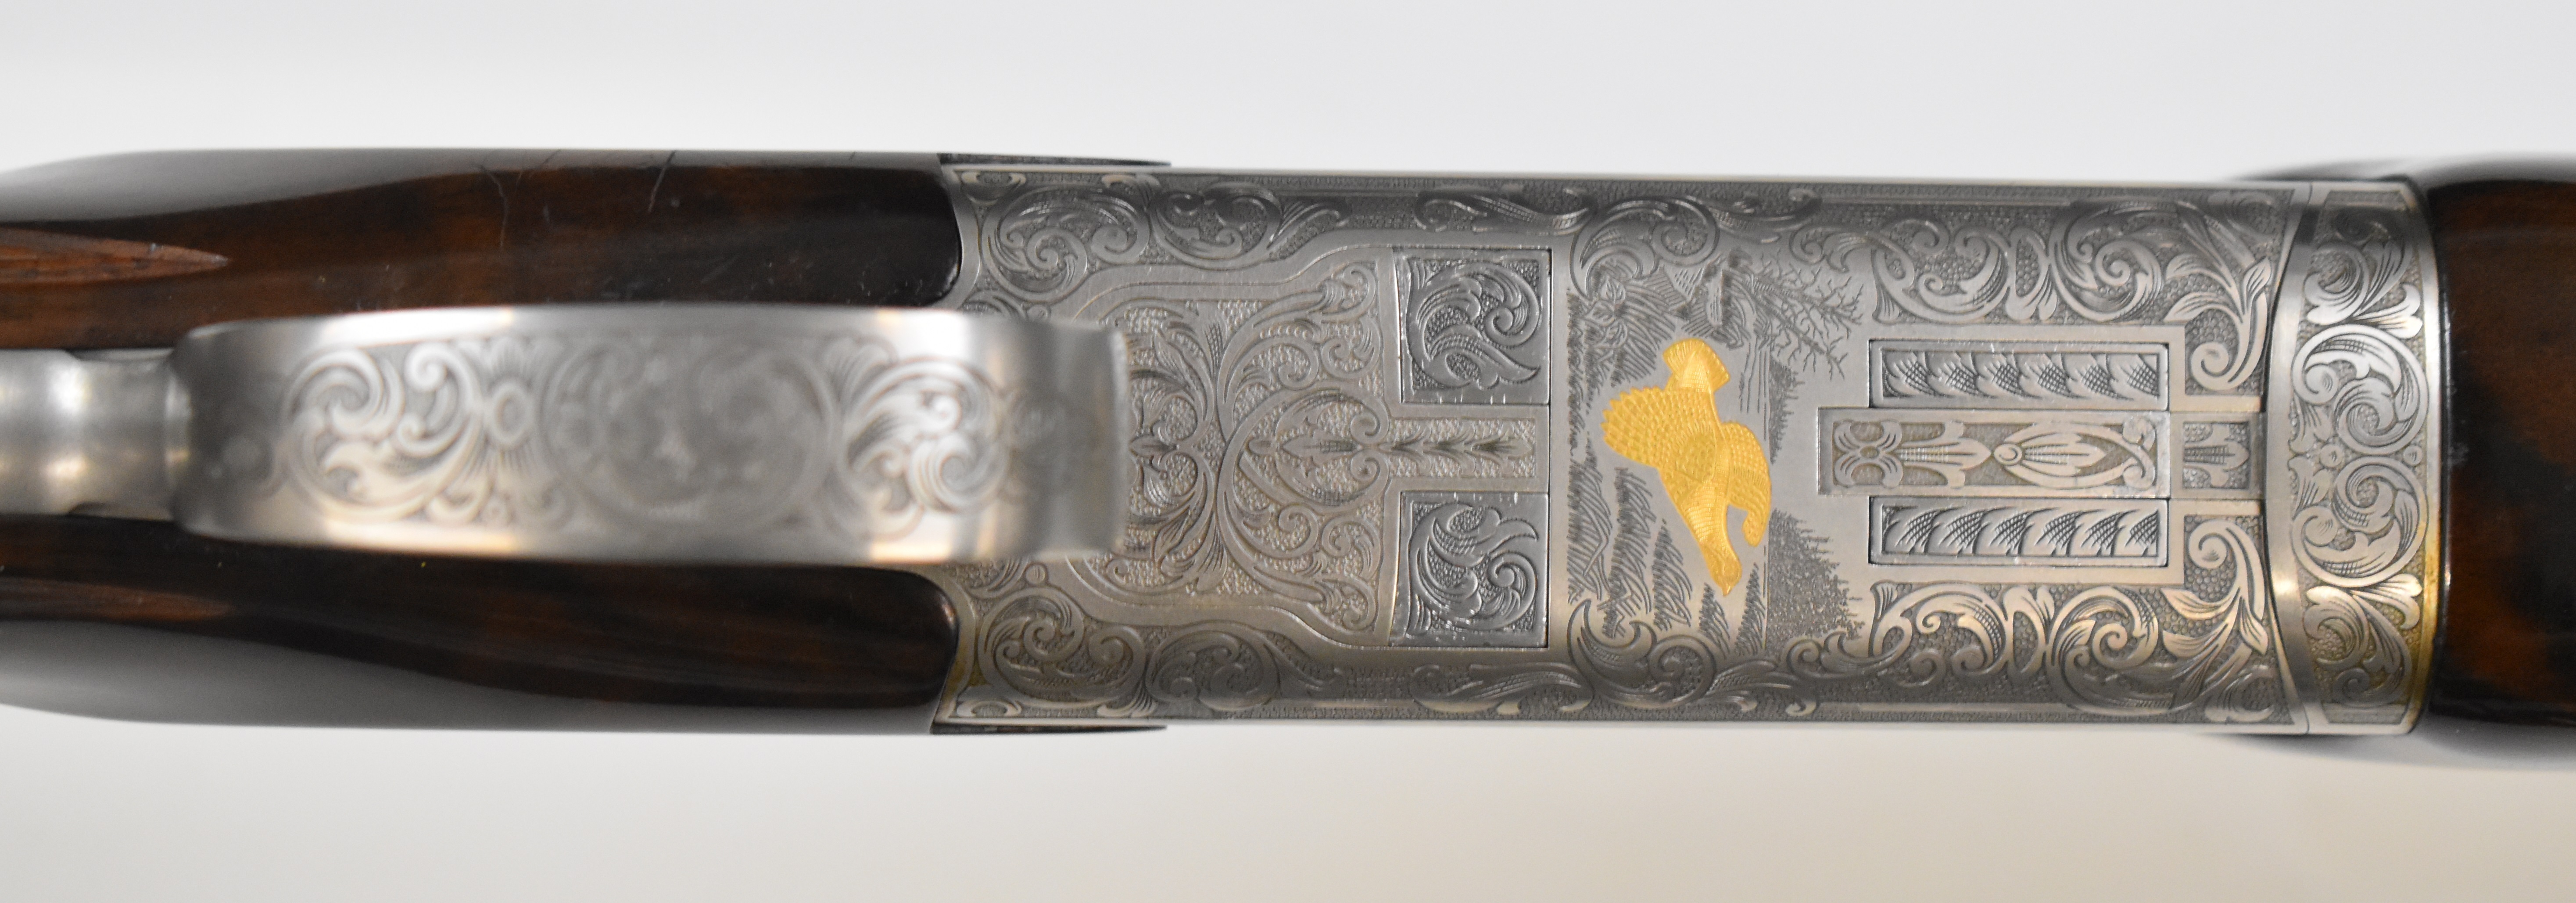 Browning B525 Ultimate 12 bore over and under ejector shotgun with gold engraving of birds - Image 7 of 12